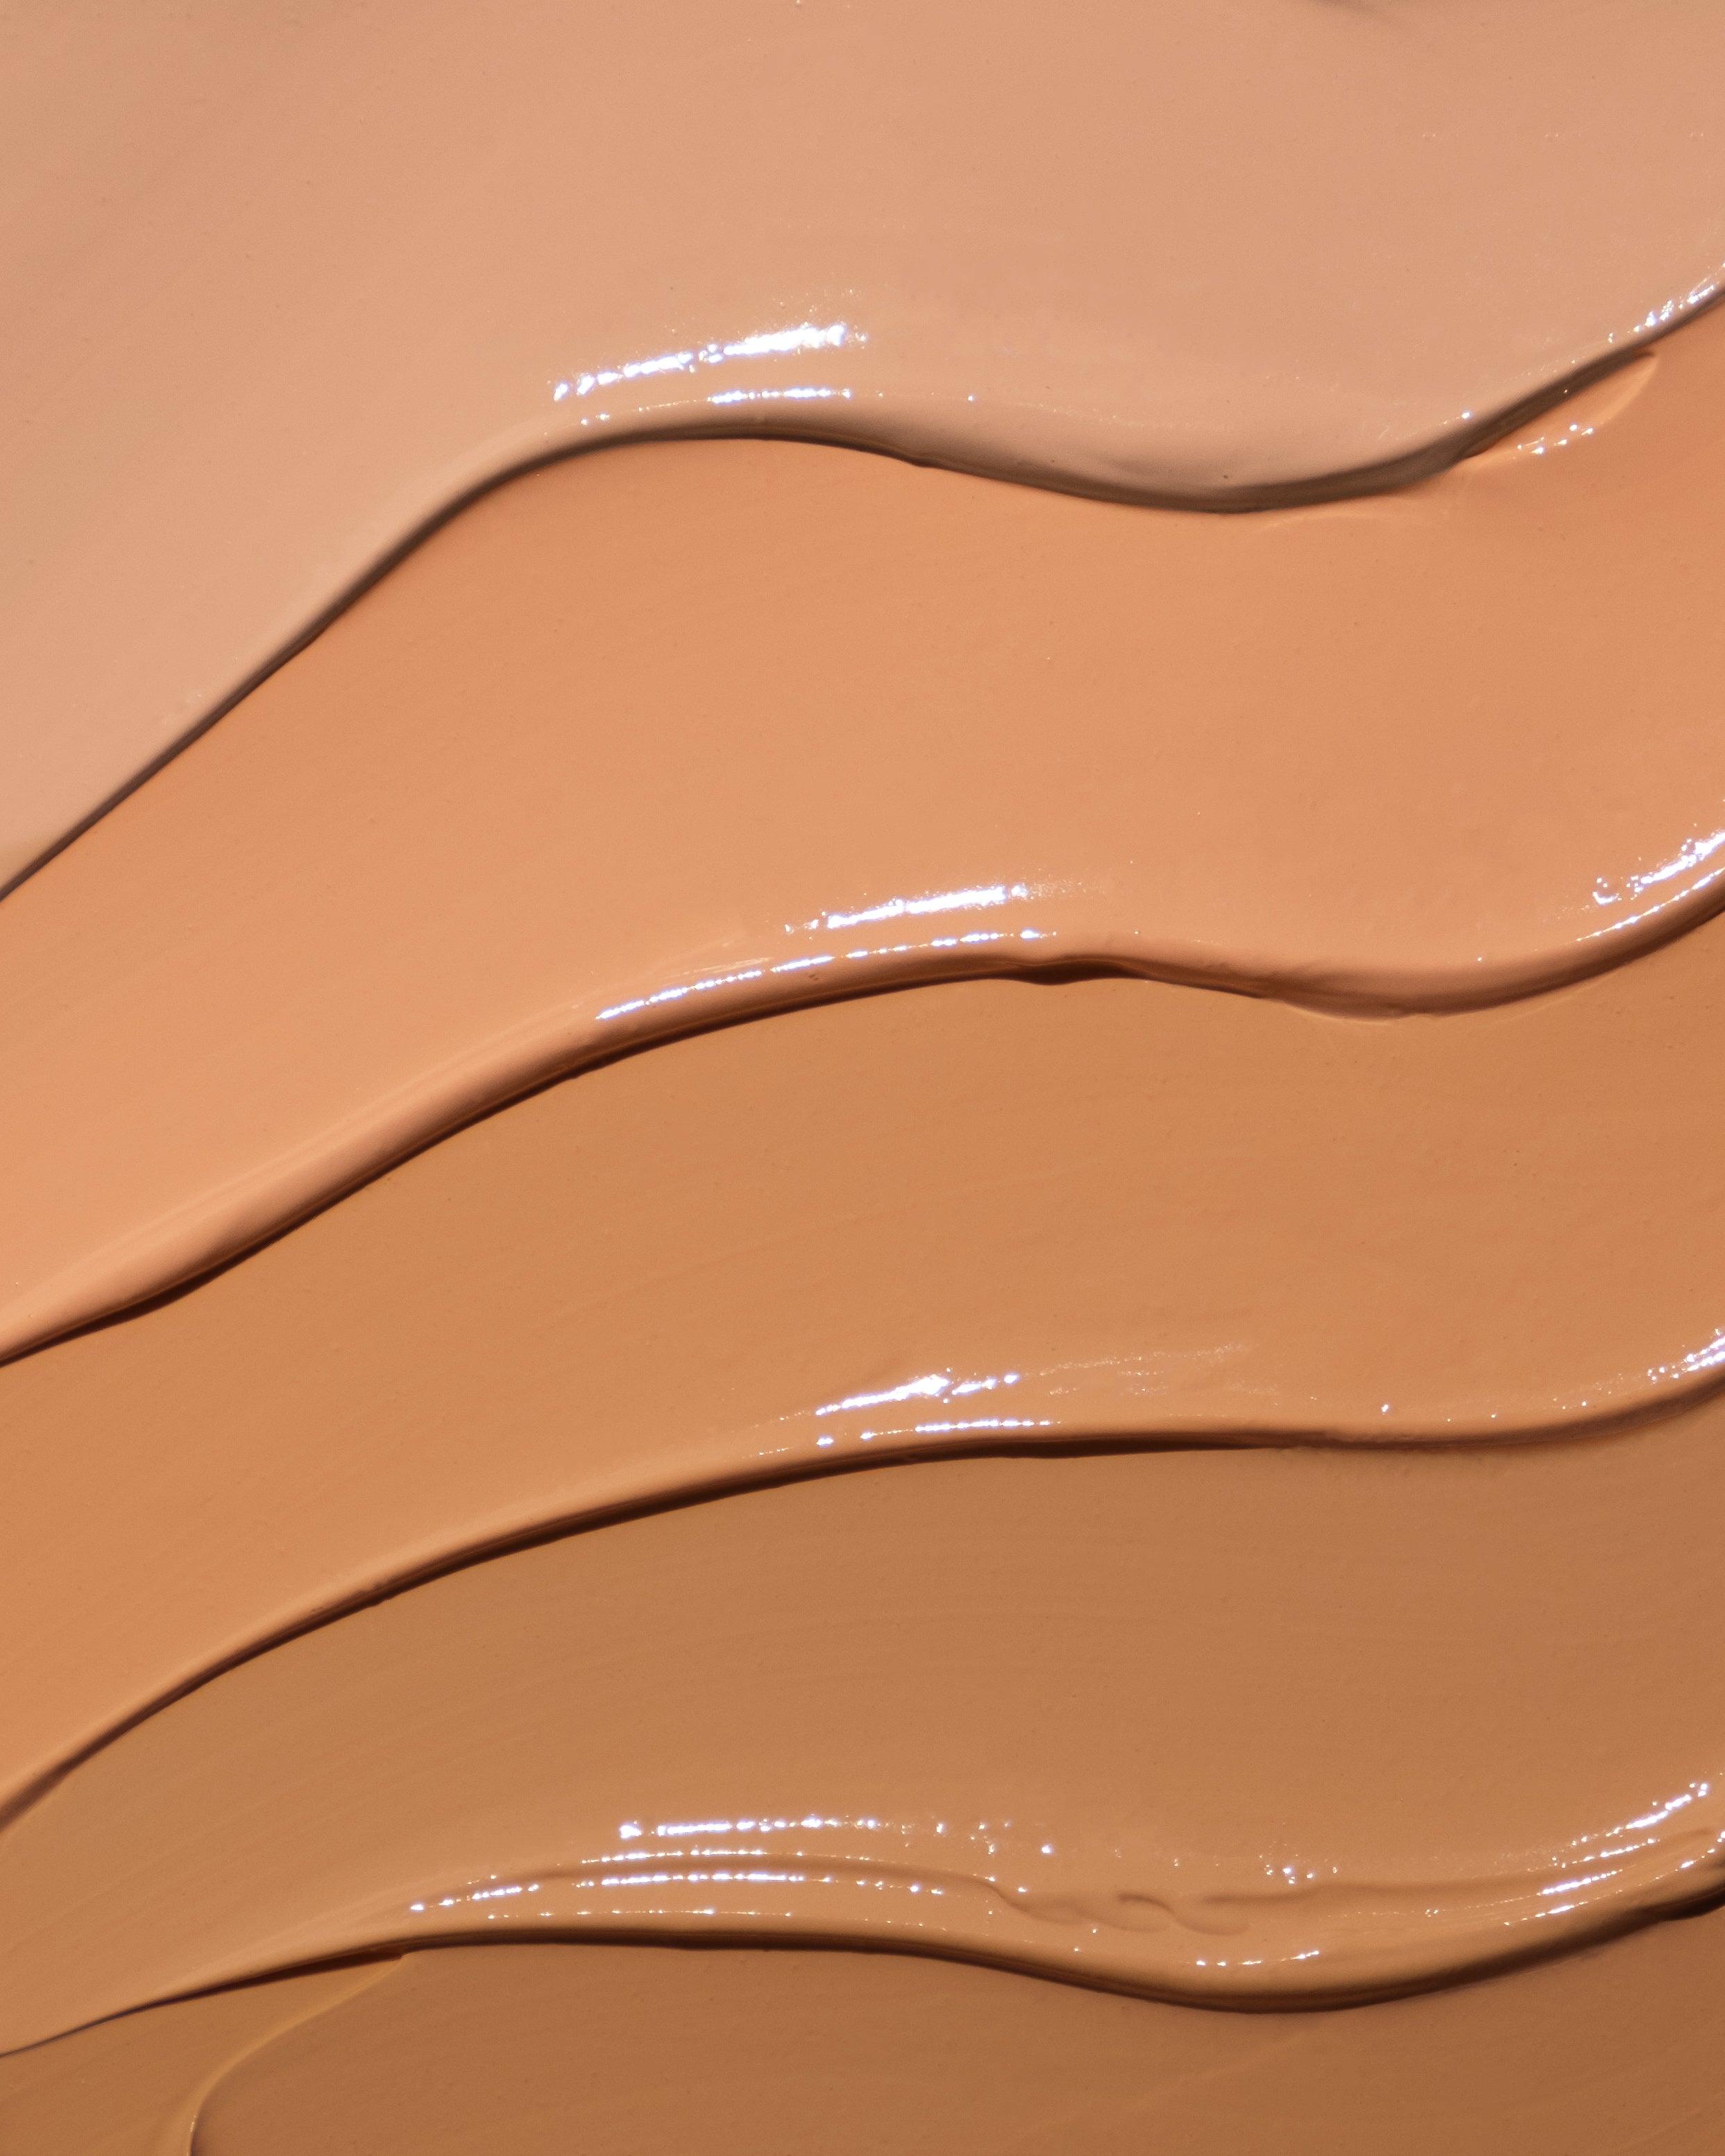 How to Choose the Best Concealer Shade - Brulée Beauty